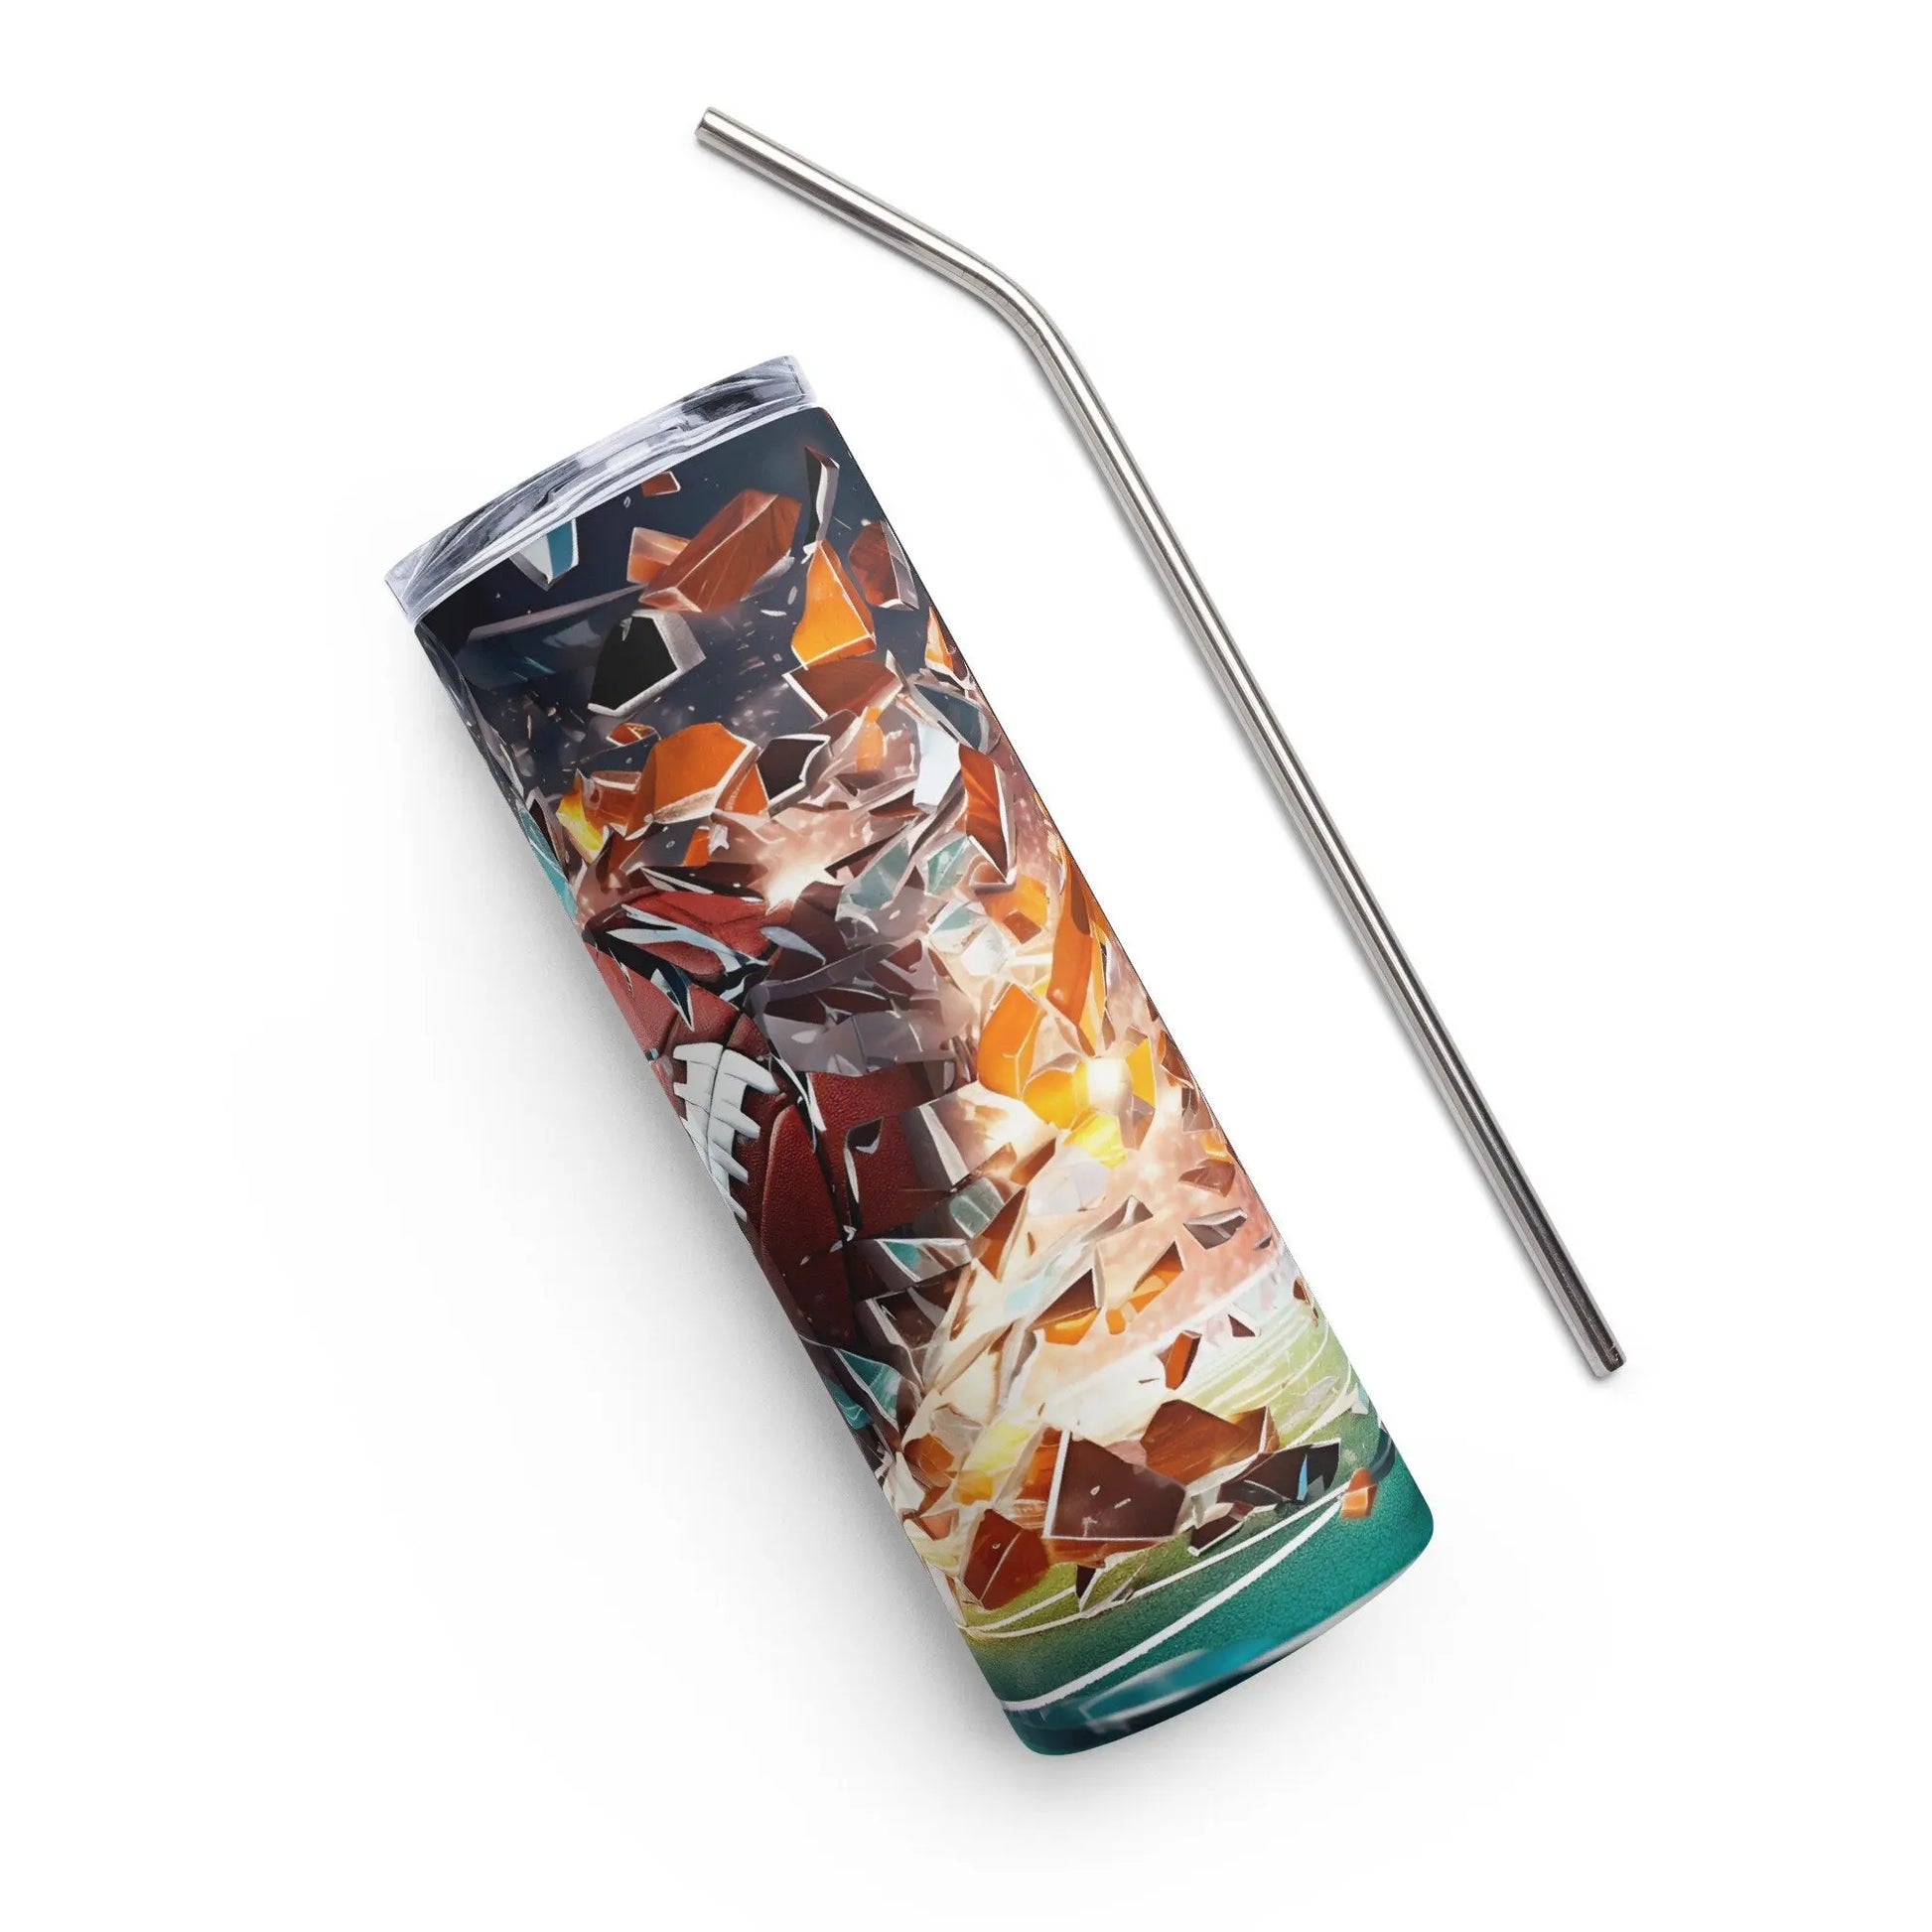 3D Embroidered Shattered Glass Football Sublimation Tumbler Gift for Men